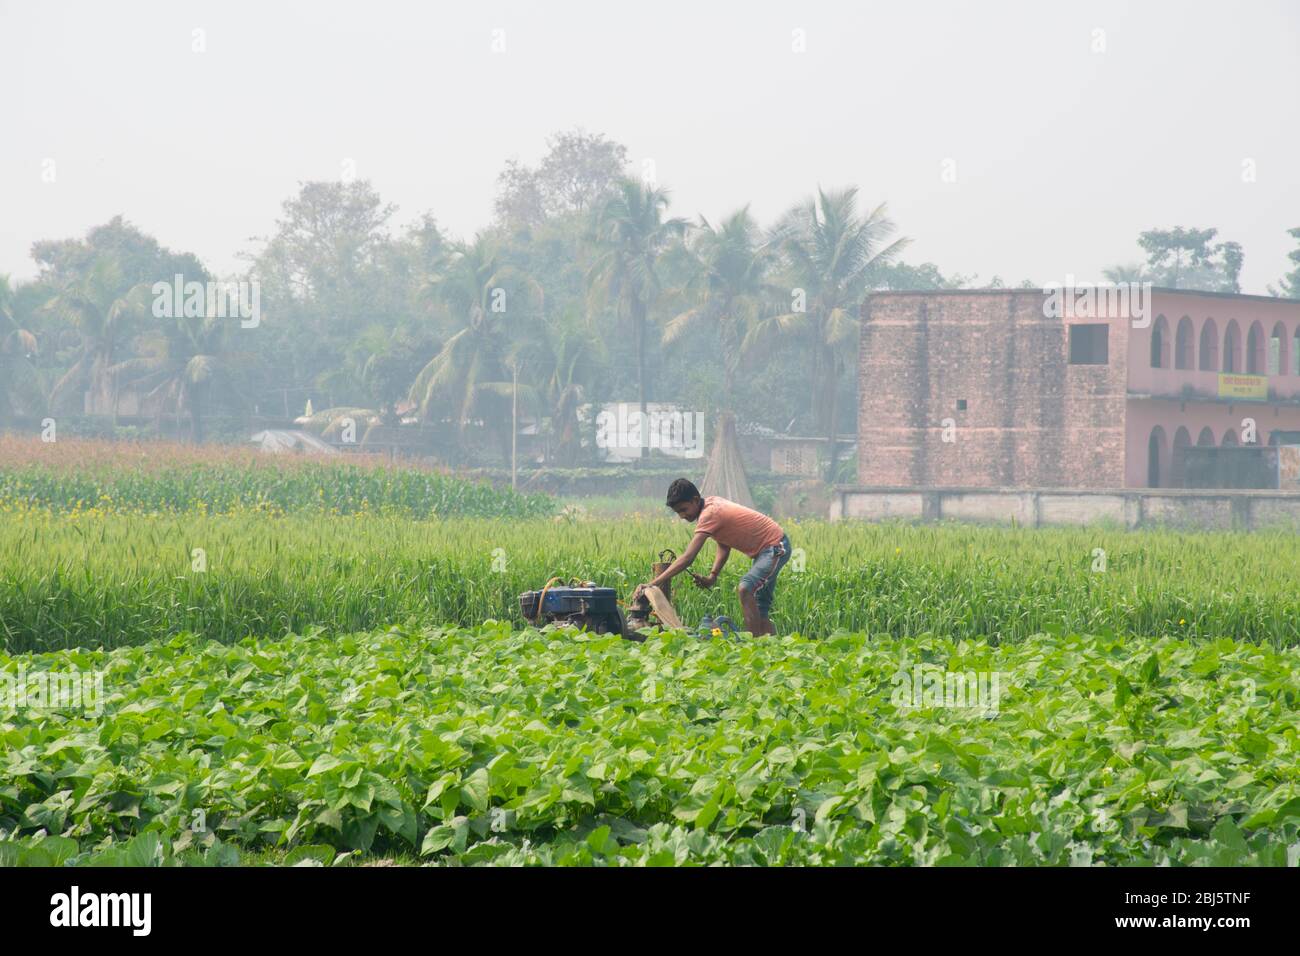 indian boy working in agricultural field Stock Photo